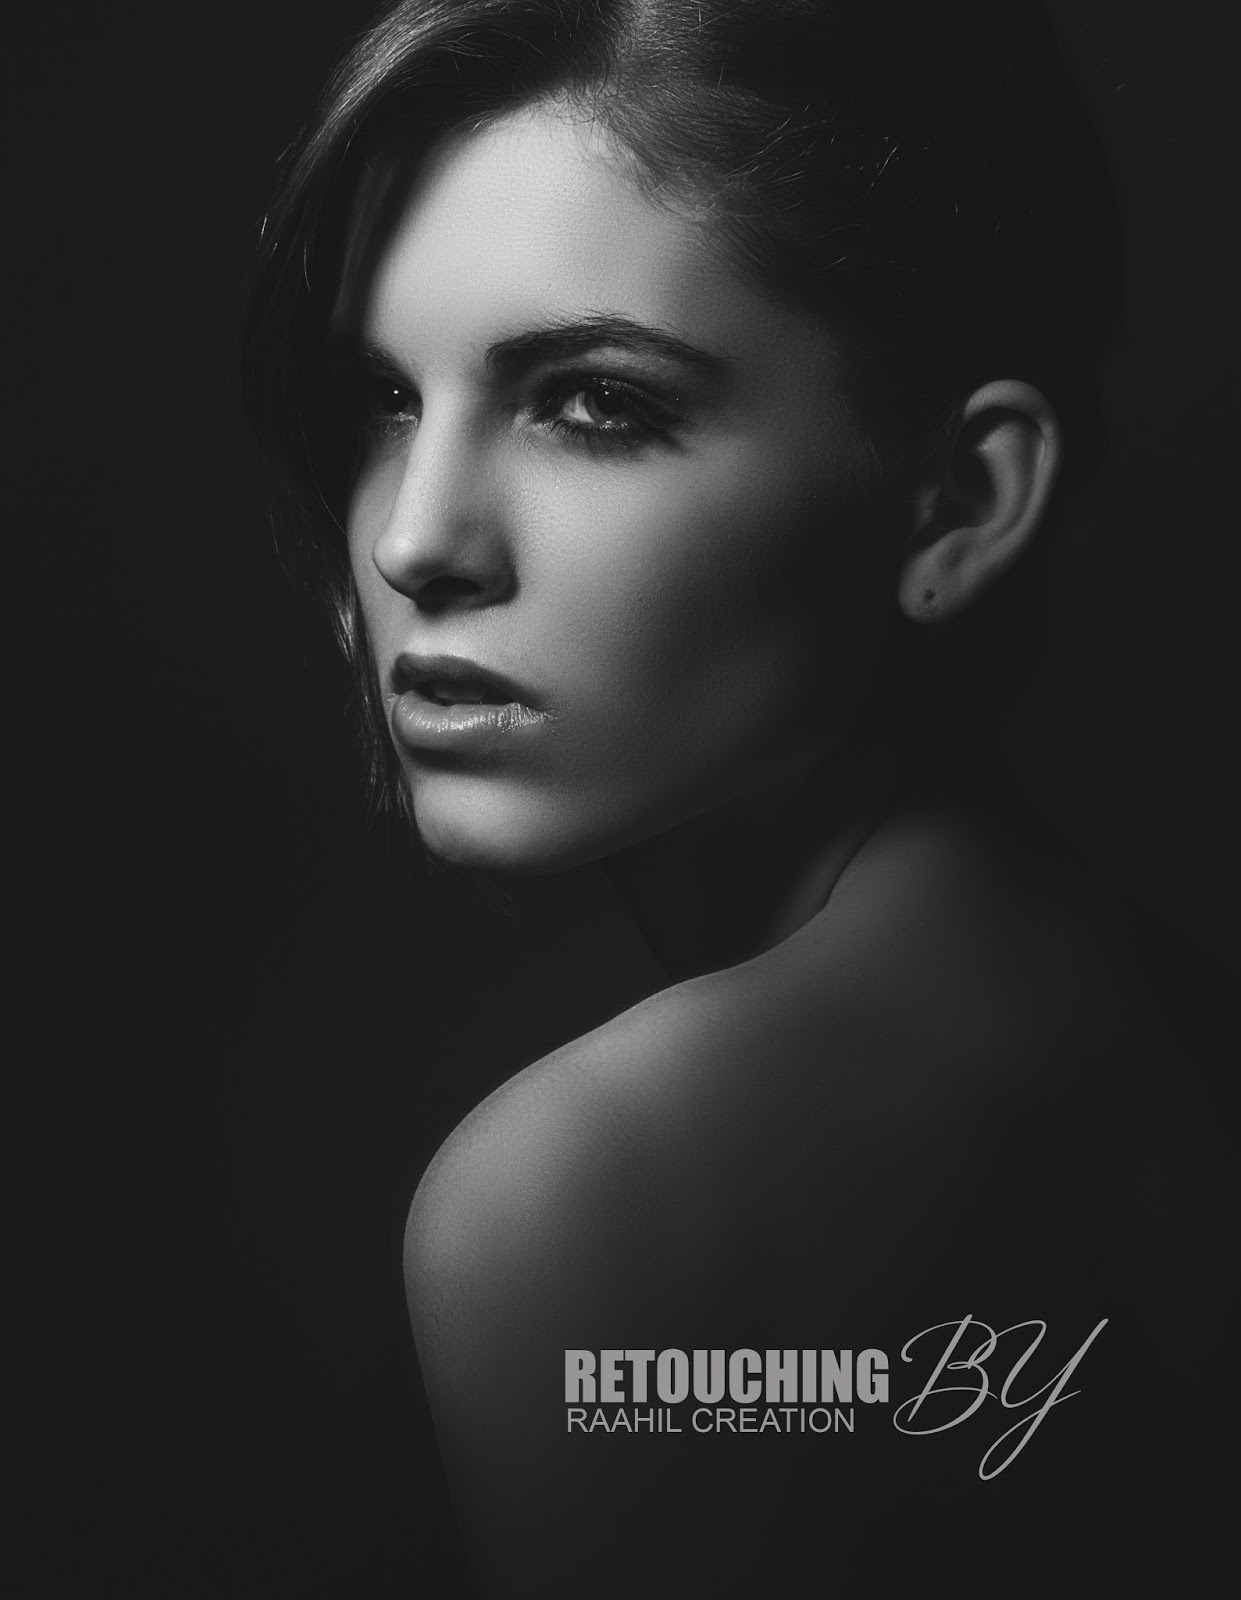 Retouching black and white beauty in photoshop - Raahil Creation